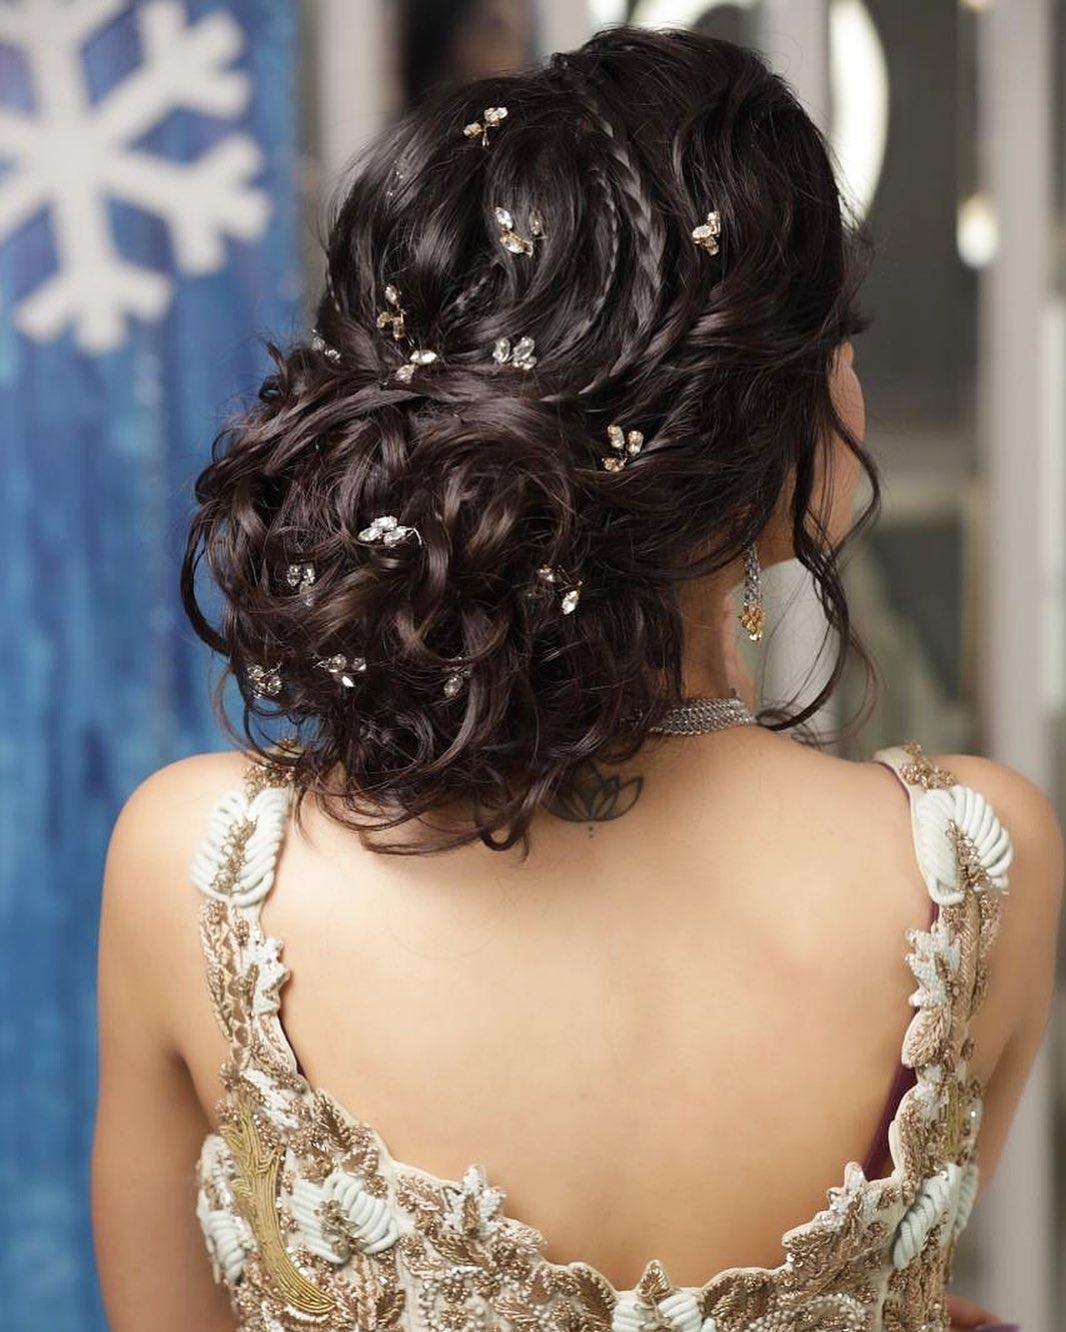 10 Latest Curly Hairstyles for Saree and Lehenga | Curly hair bun styles,  Curly hair styles, Dry curly hair